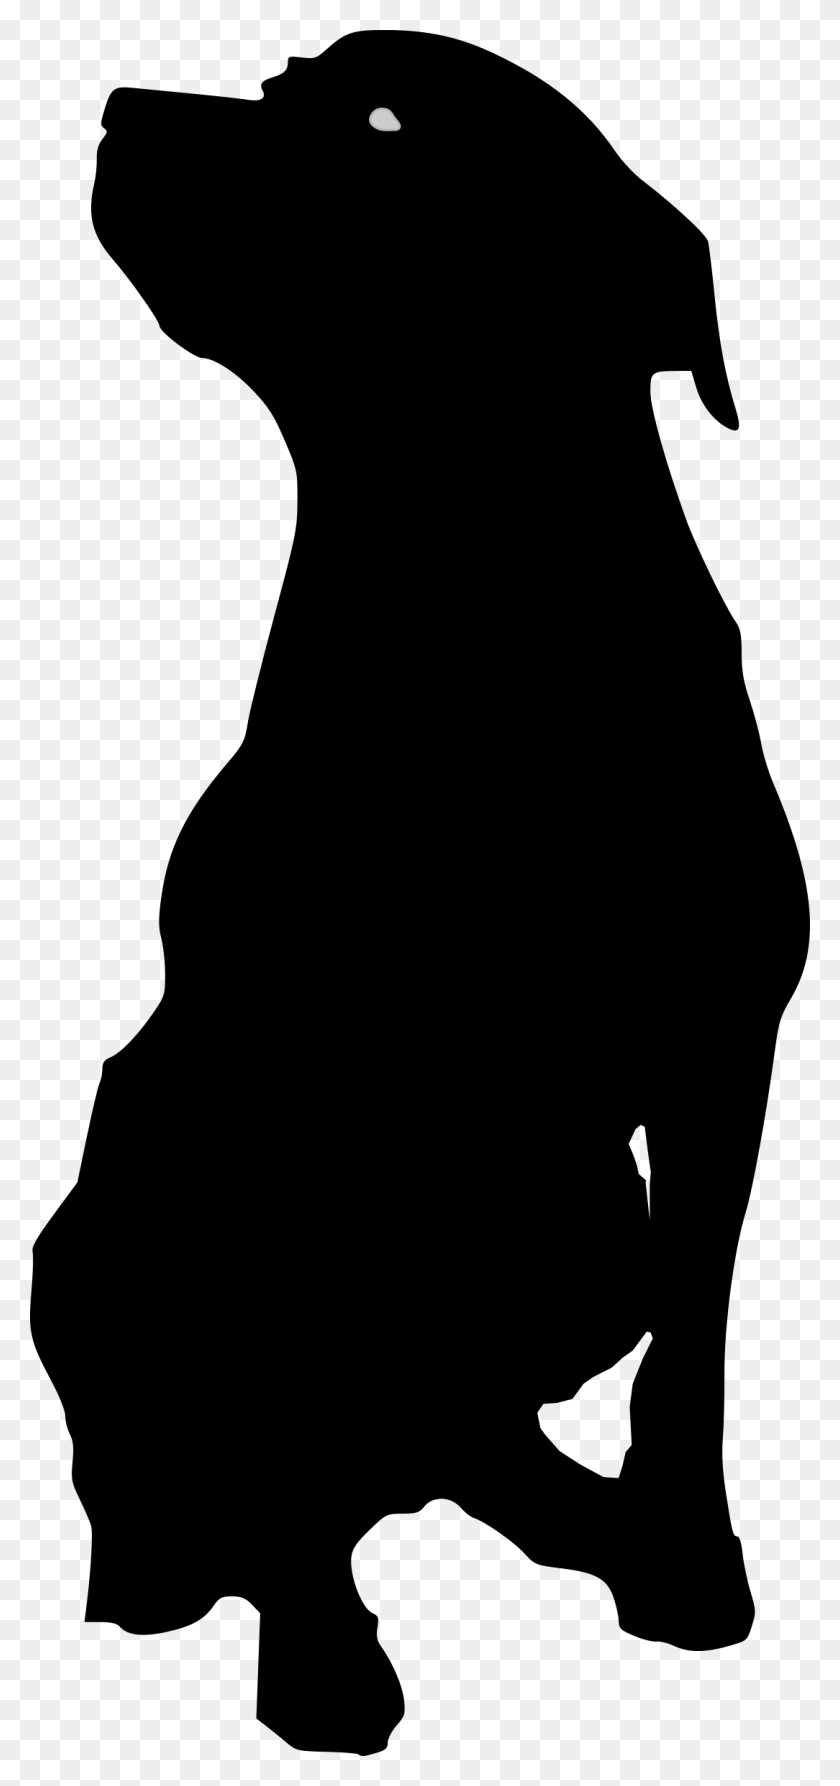 1084x2400 This Free Icons Design Of Rottweiler Outline 2 Dog Vector, Grey, World Of Warcraft Hd Png